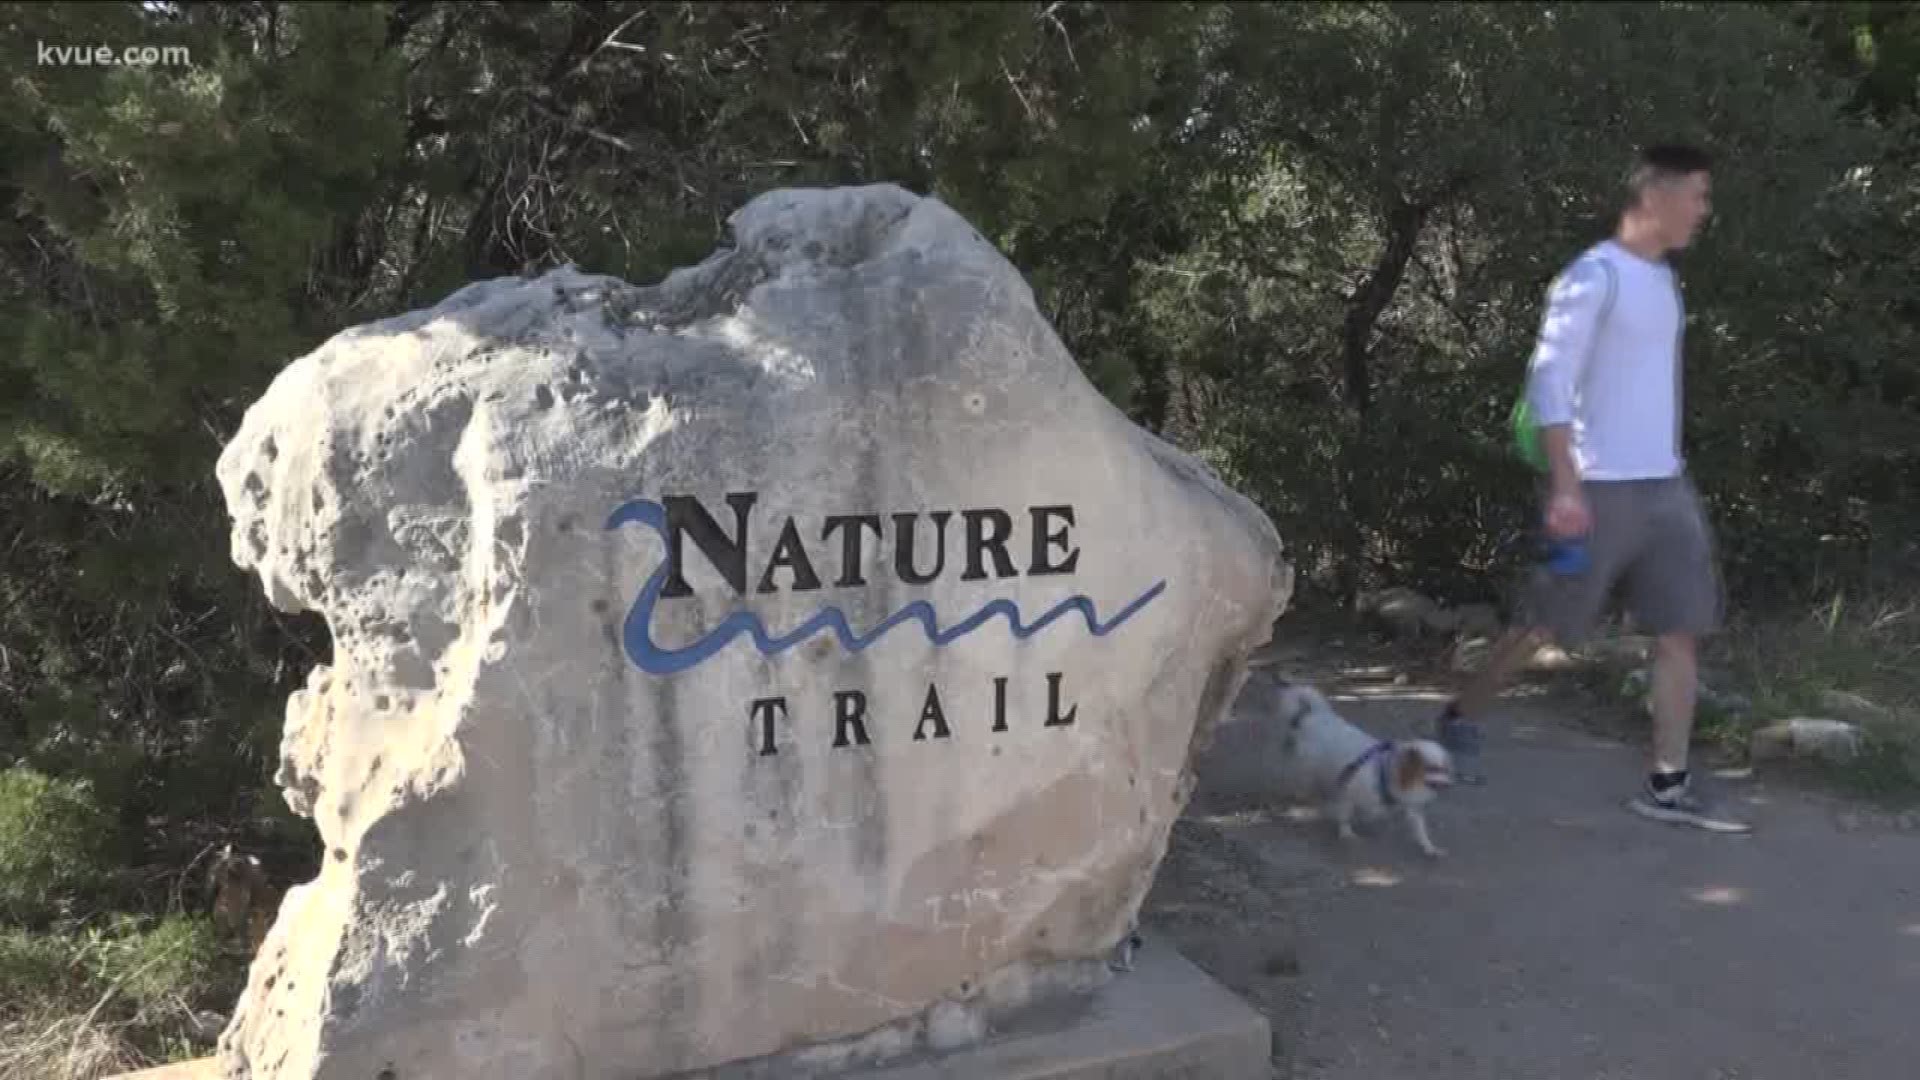 If you want to take a hike on this popular trail in northwest Austin – the River Place Nature Trail – you'll soon have to pay a fee.